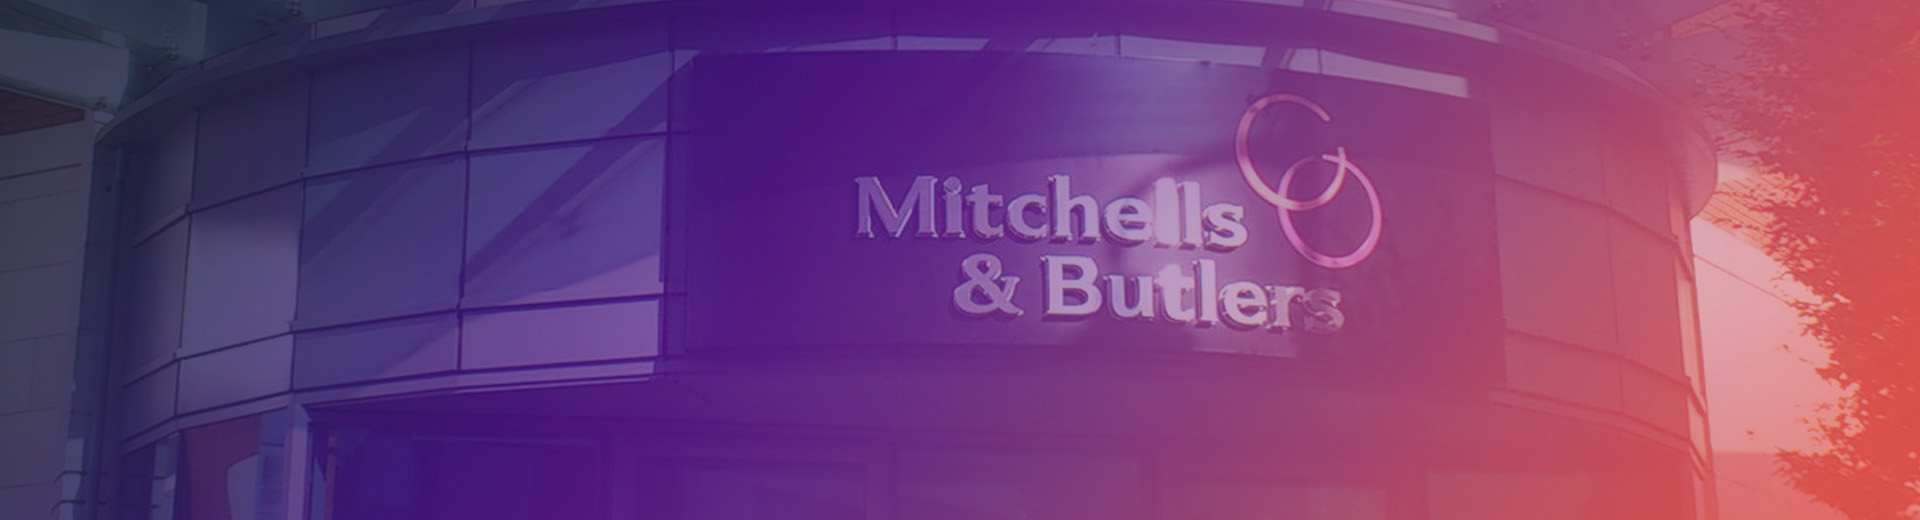 Mitchells and Butlers building